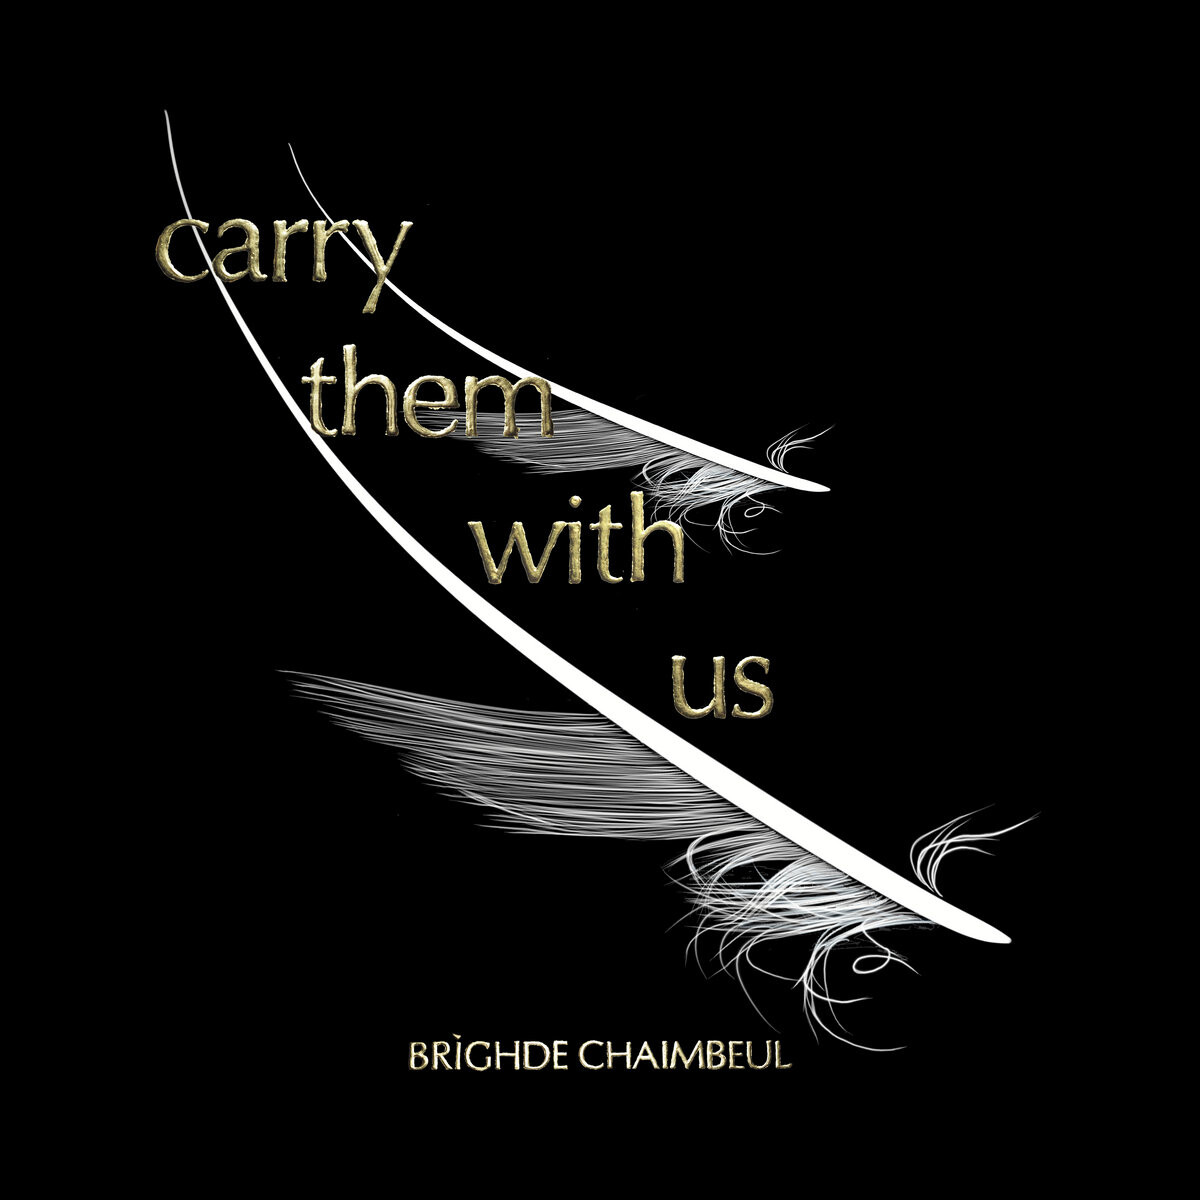 brighde-chaimbeul-carry-them-with-us